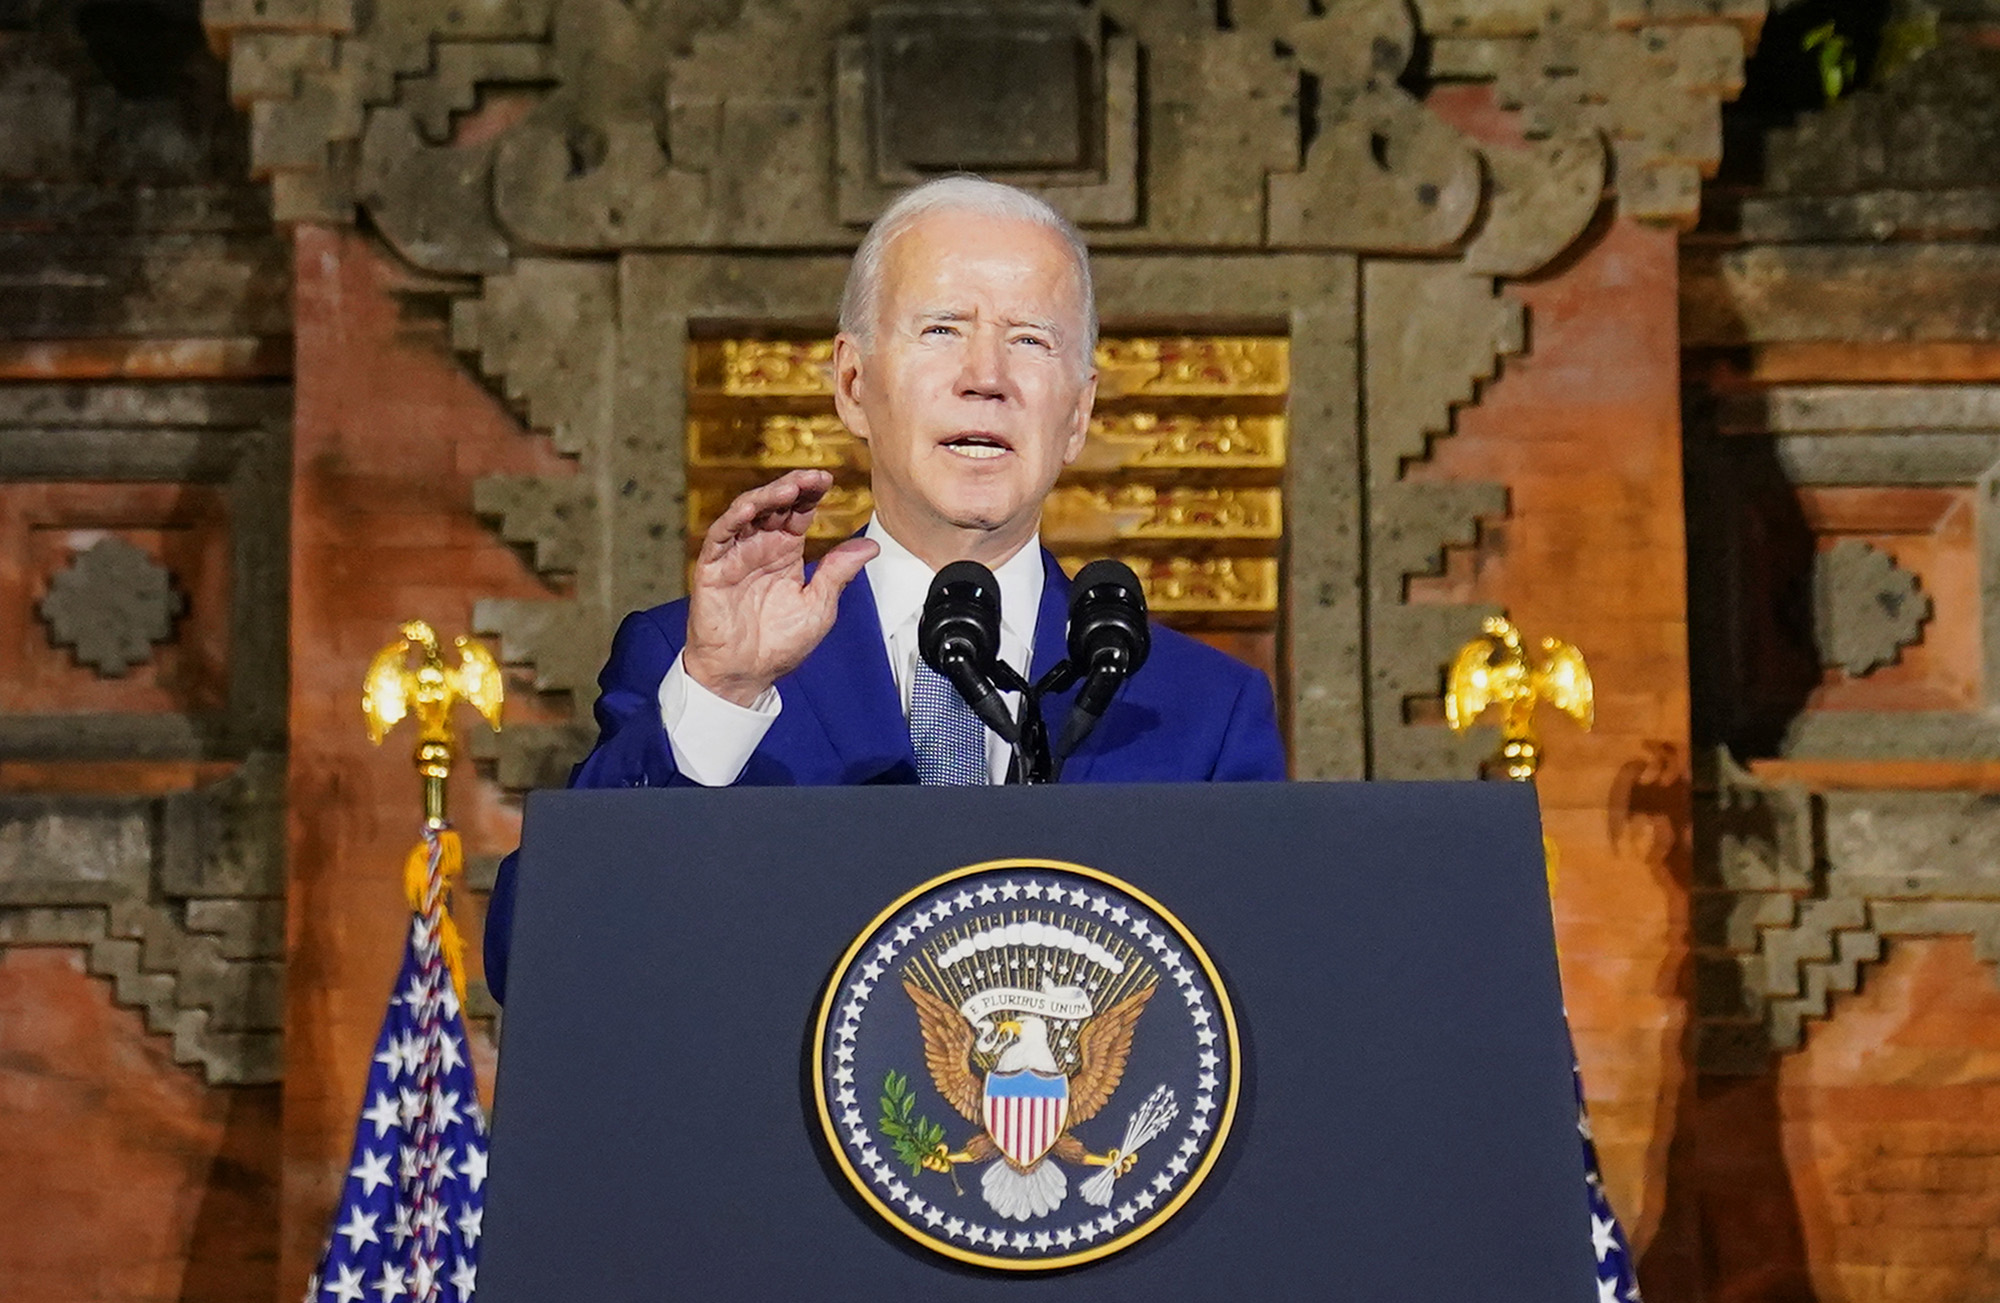 U.S. President Joe Biden speaks during a news conference following his meeting with Chinese president Xi Jinping, ahead of the G20 leaders' summit, in Bali, Indonesia, on November 14.